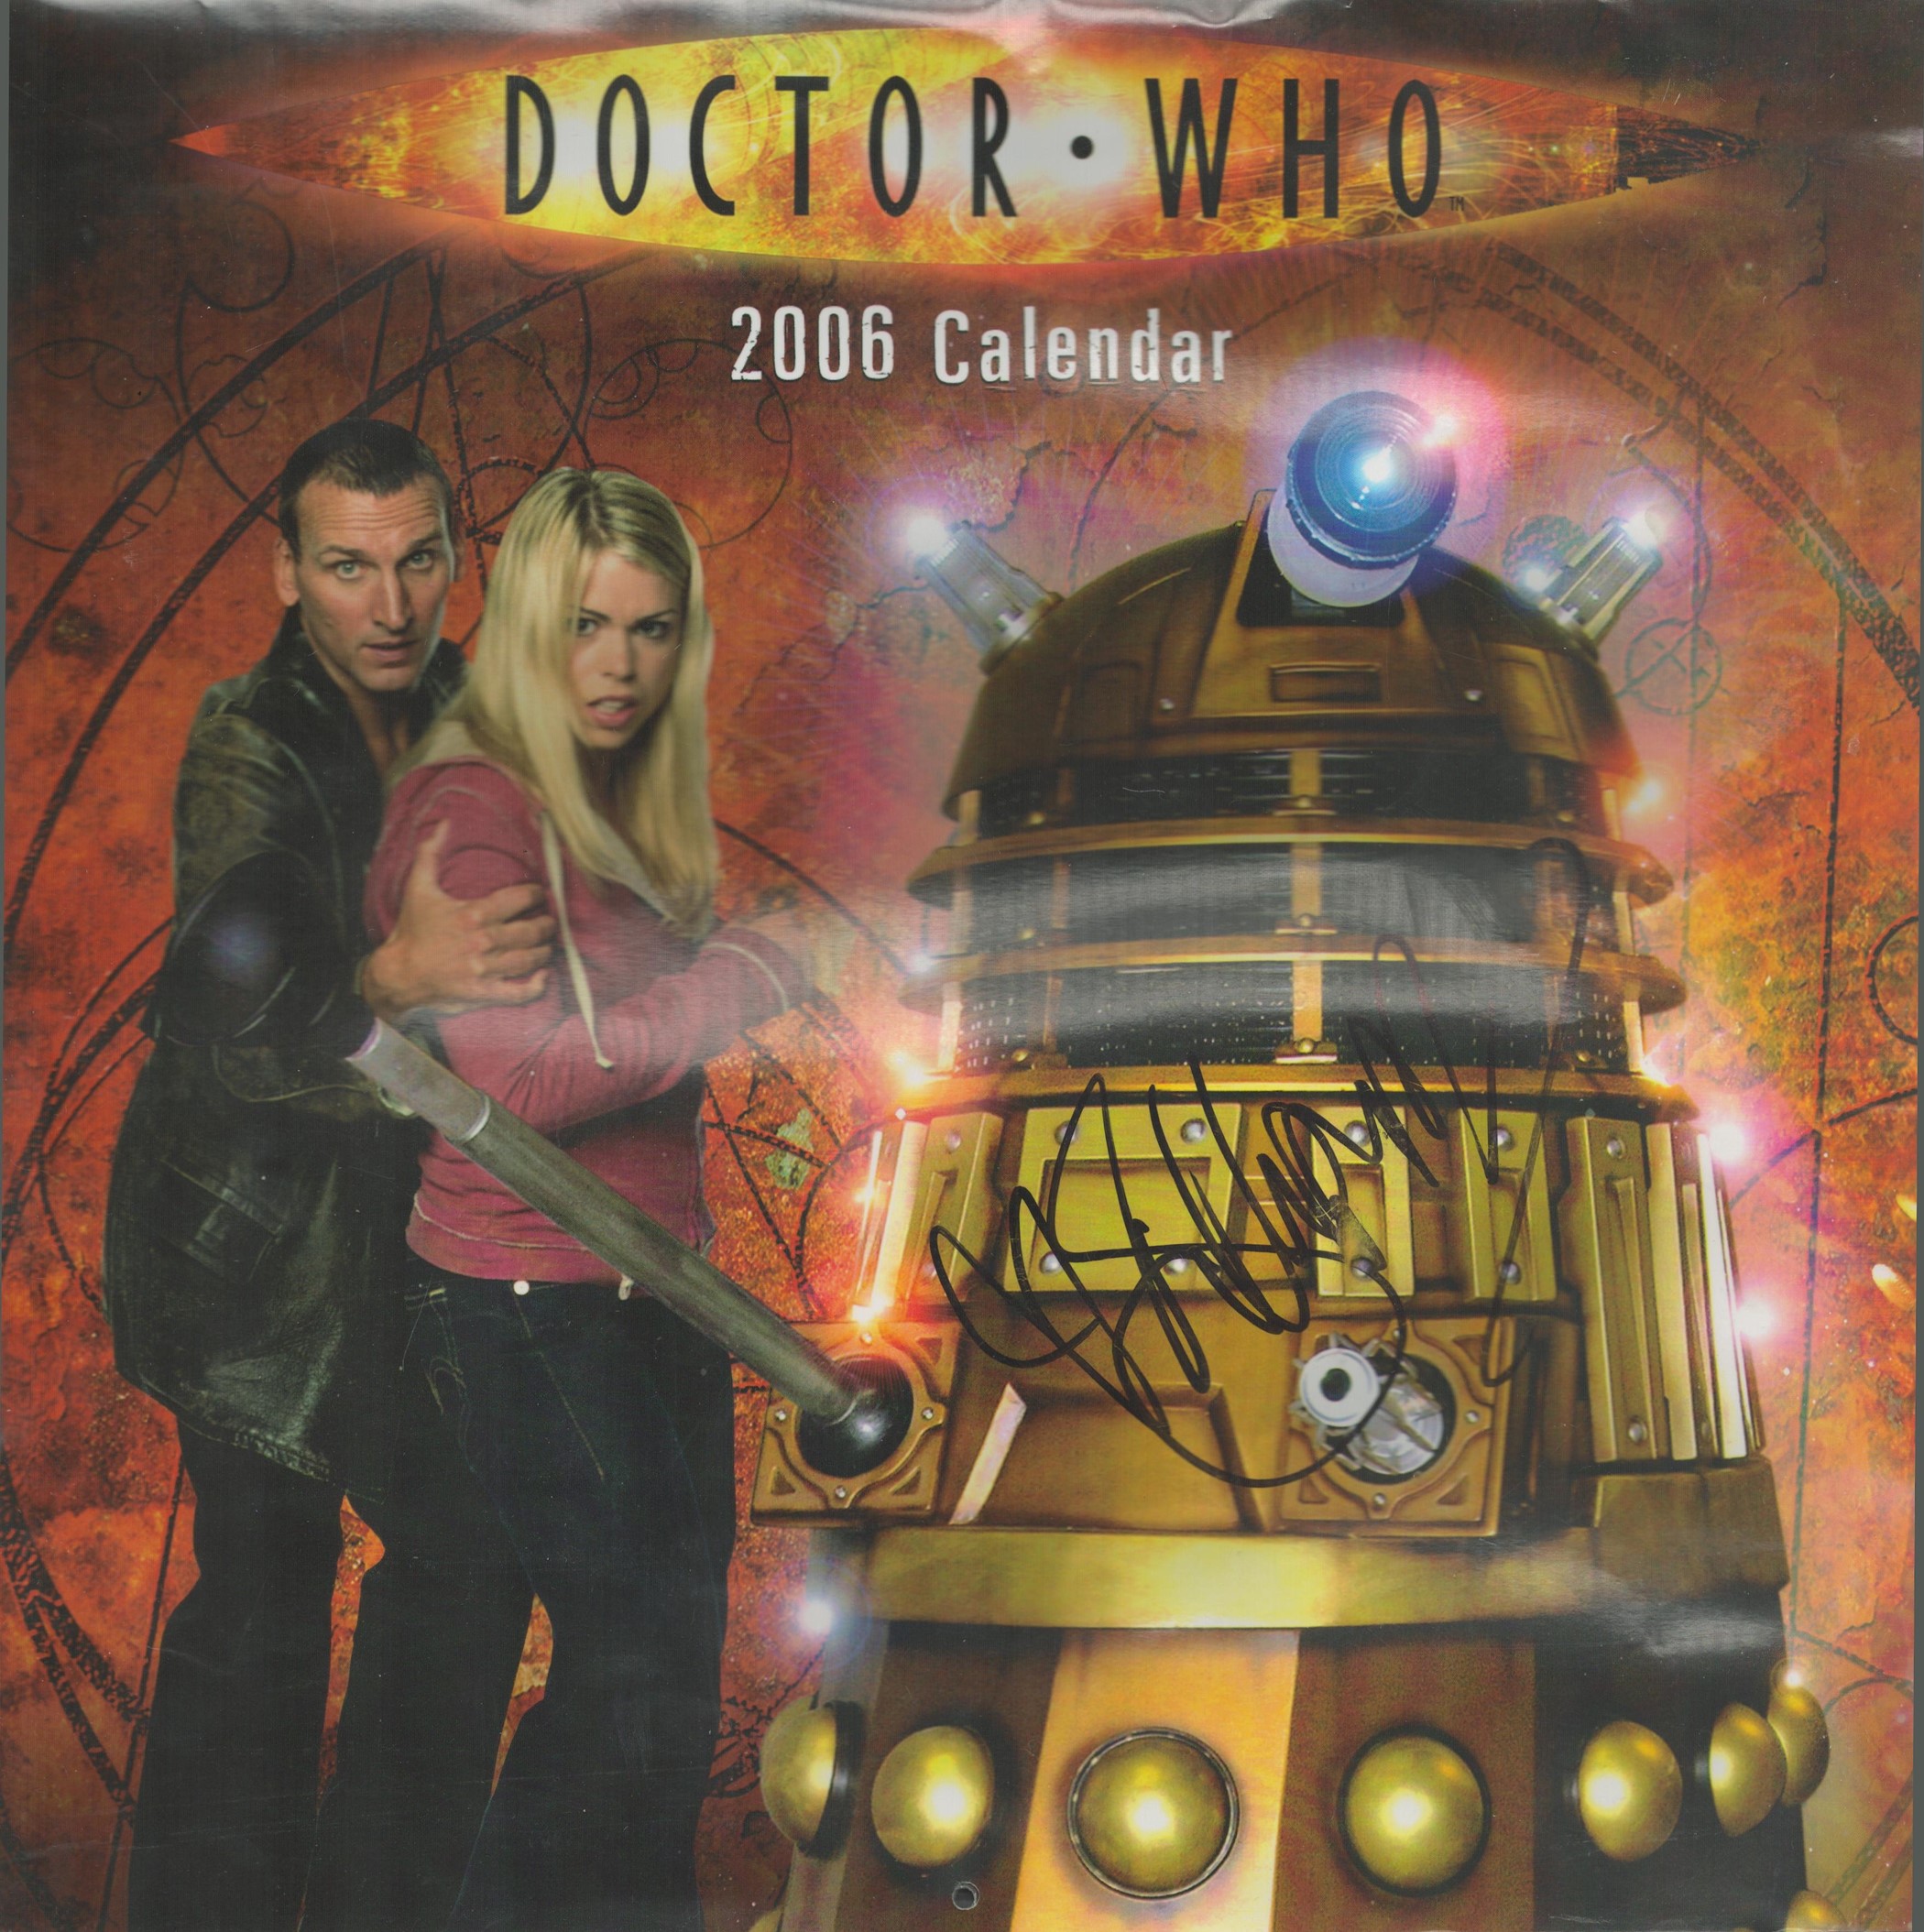 Billie Piper signed Doctor Who 2006 calendar. Piper is an English actress and former singer. She